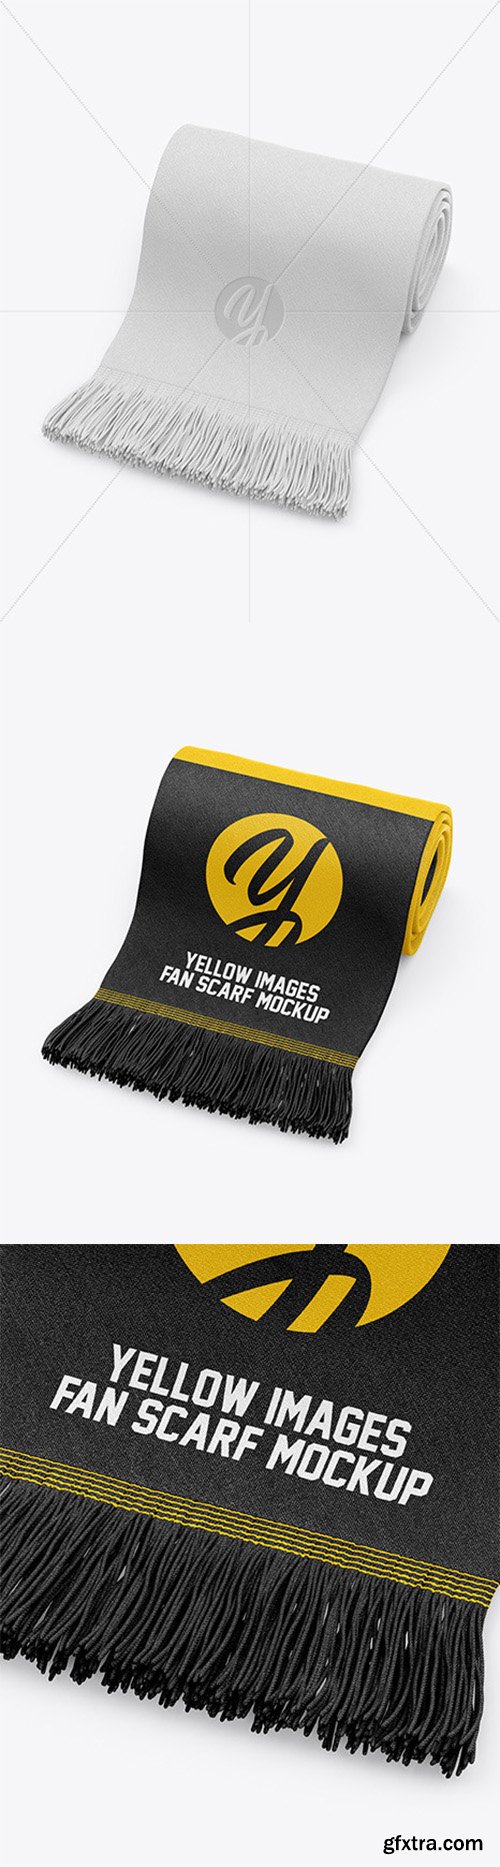 Download View Scarf Mockup Pictures Yellowimages - Free PSD Mockup ...